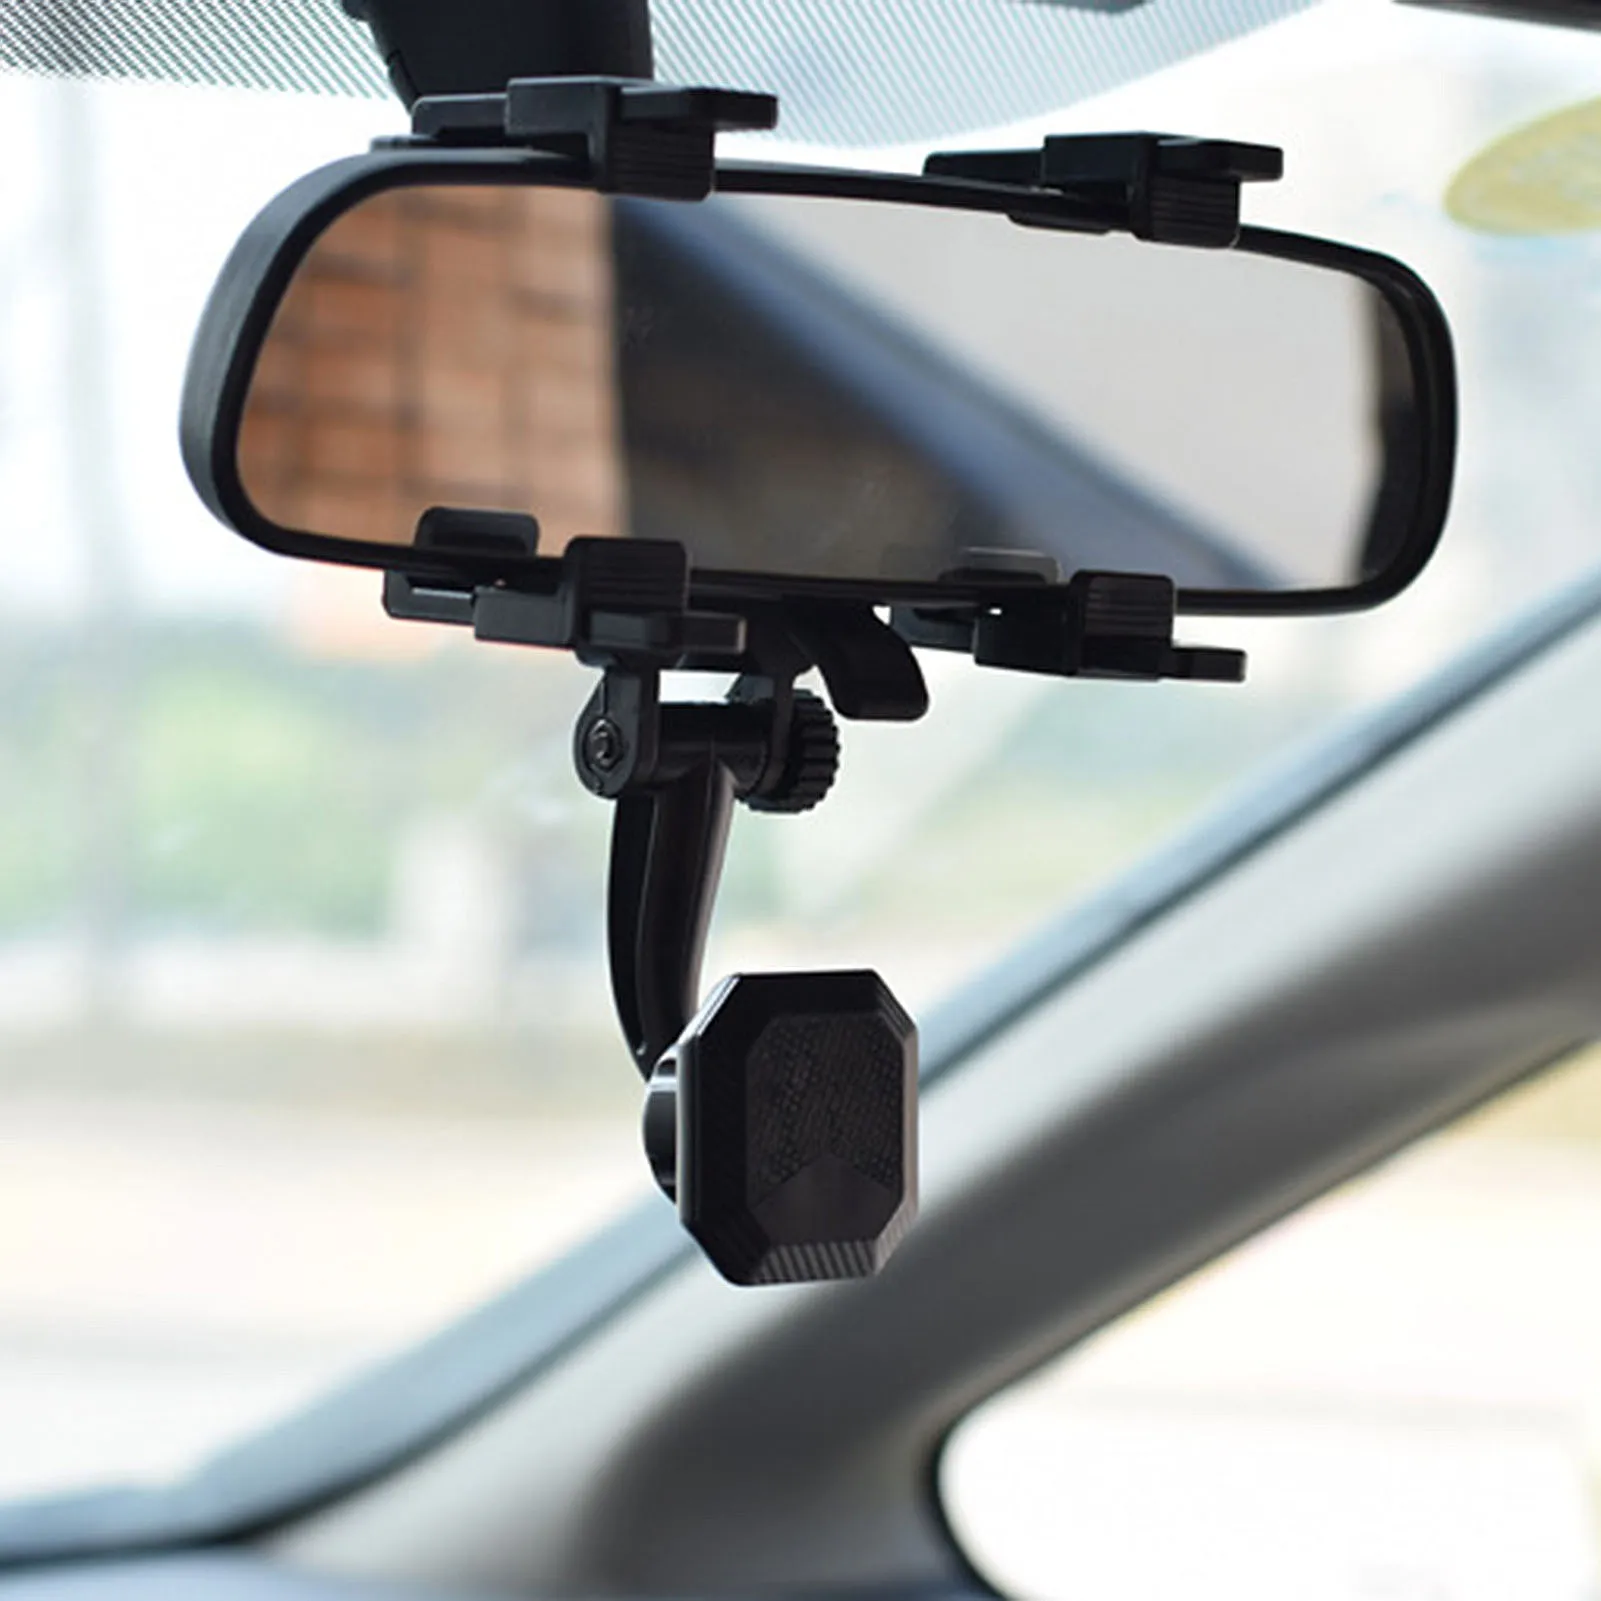 

Car Phone Holder Car Rearview Mirror Mount Phone Holder 360 Degrees For Phone GPS Smartphone Stand Universal Car Phone Holder